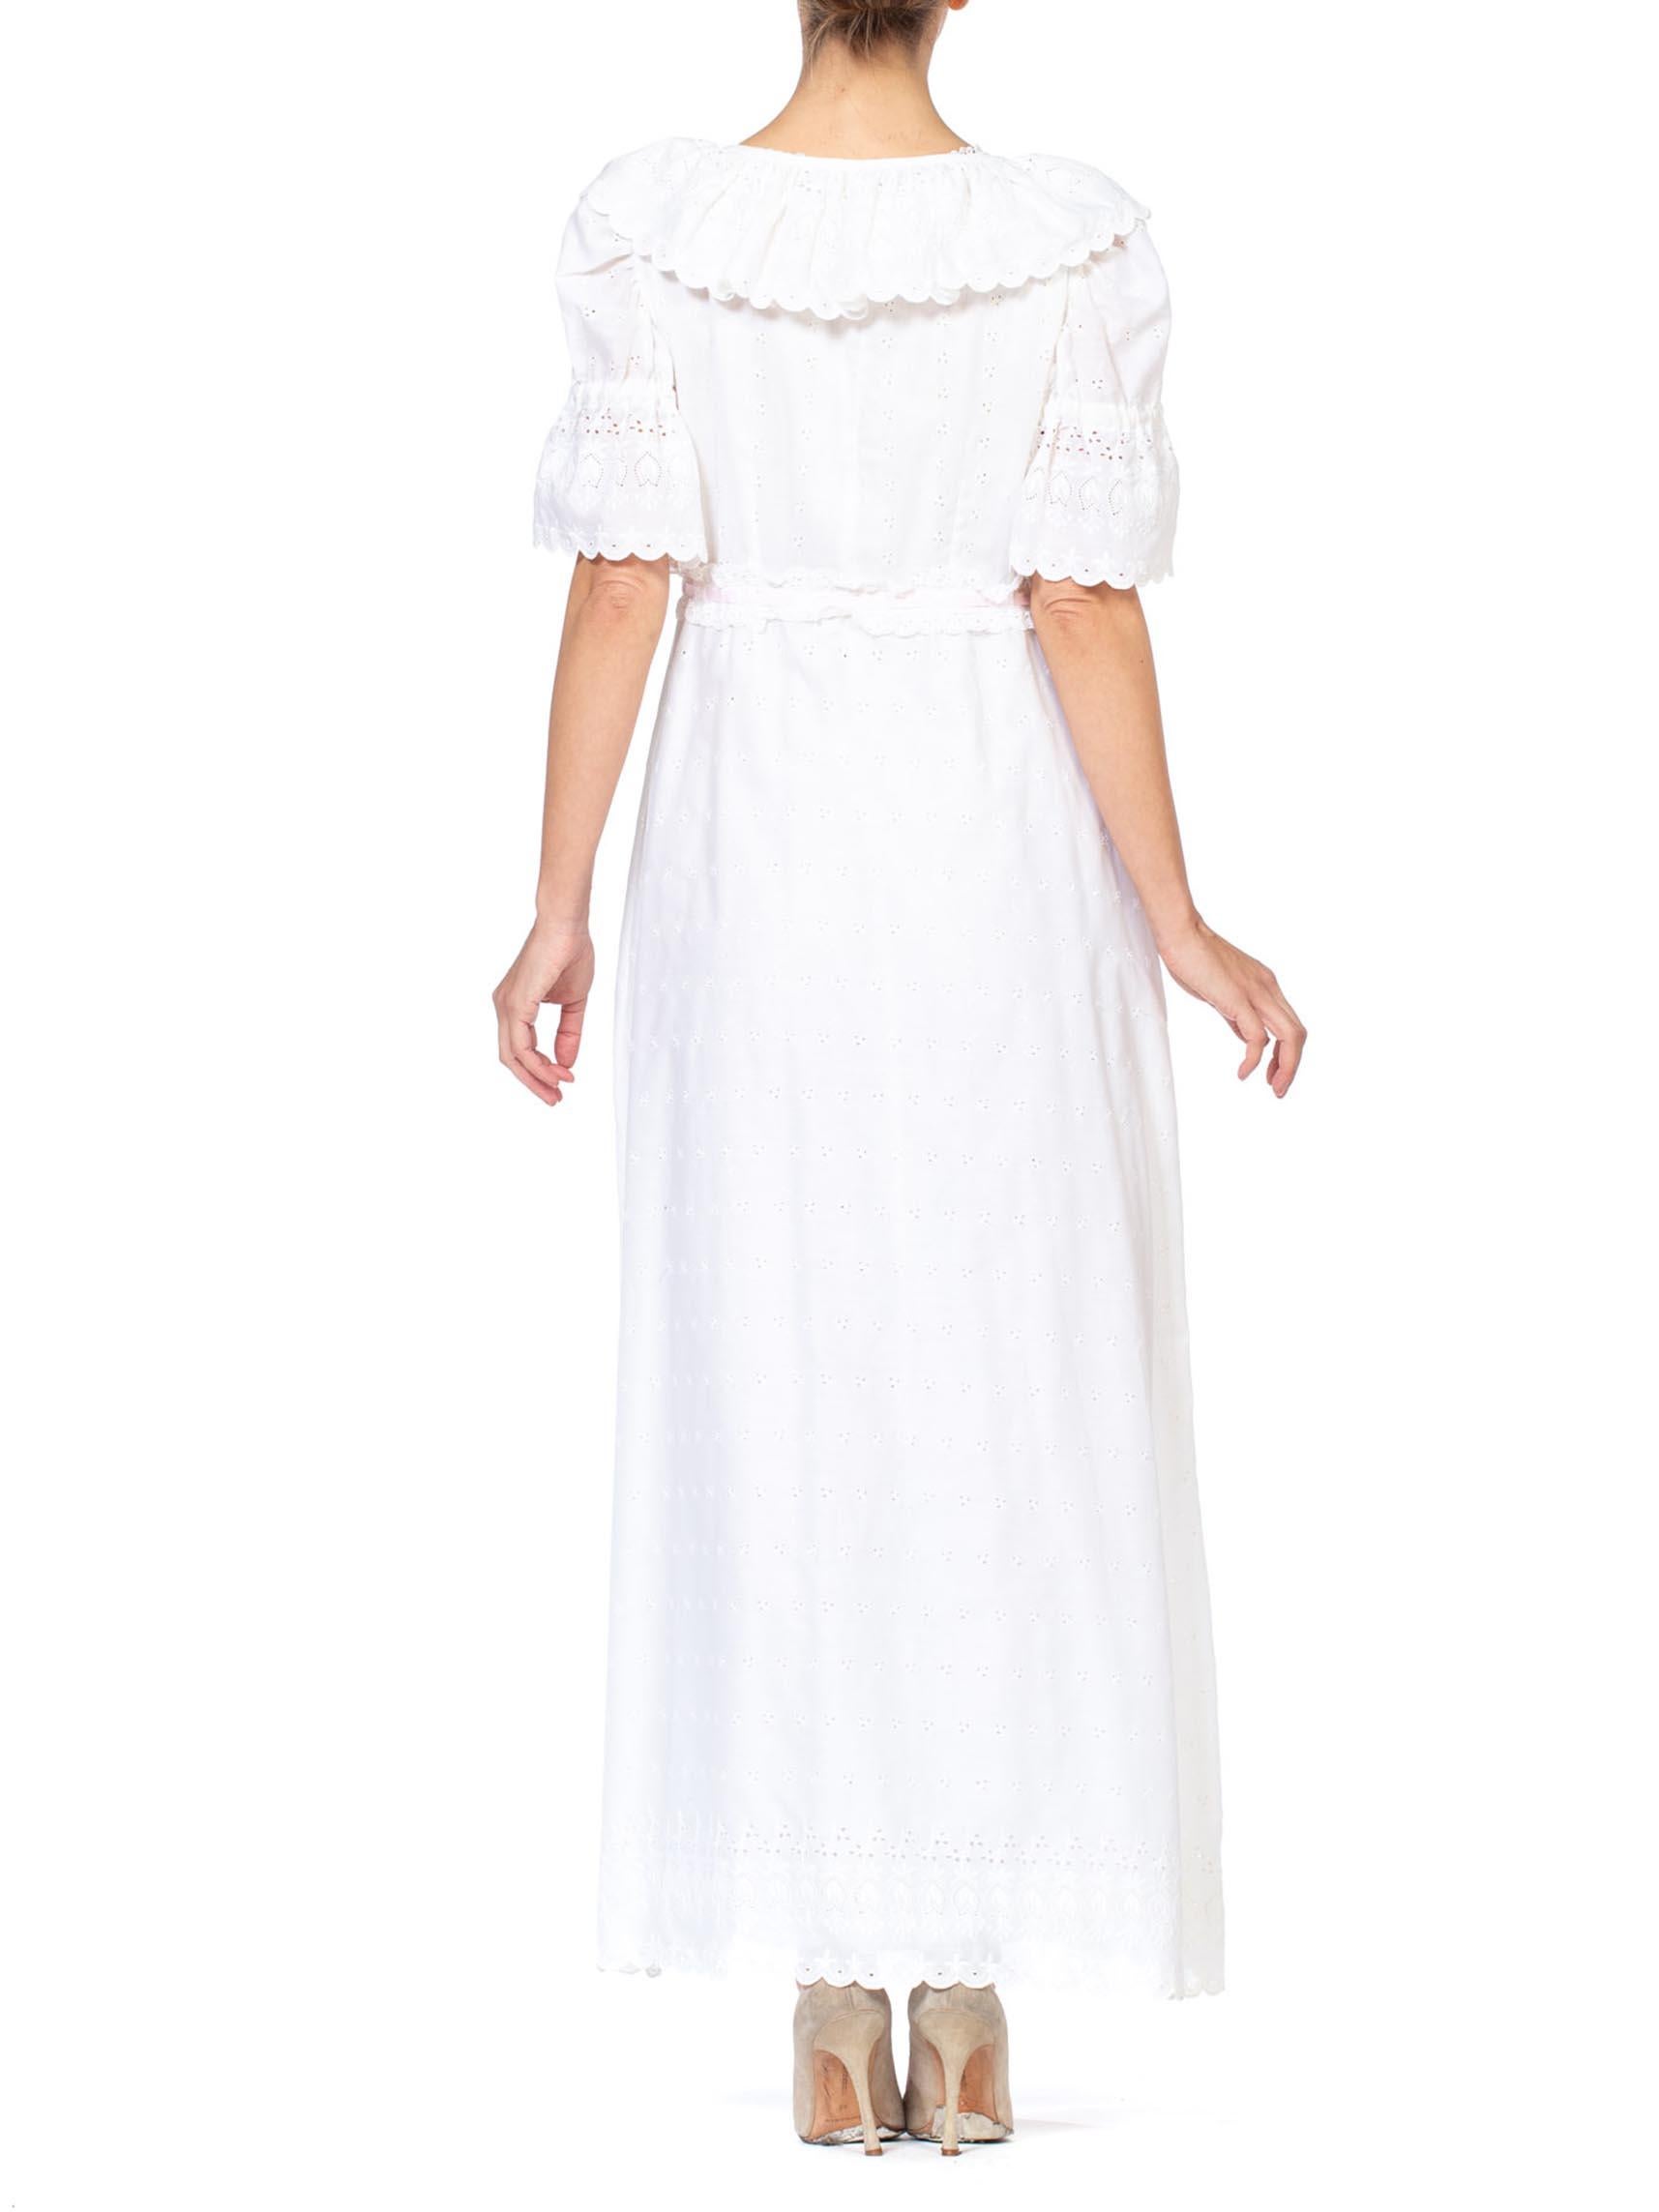 1970S White Embroidered Cotton Blend Eyelet Lace Negligee & Duster Robe Set In Excellent Condition For Sale In New York, NY